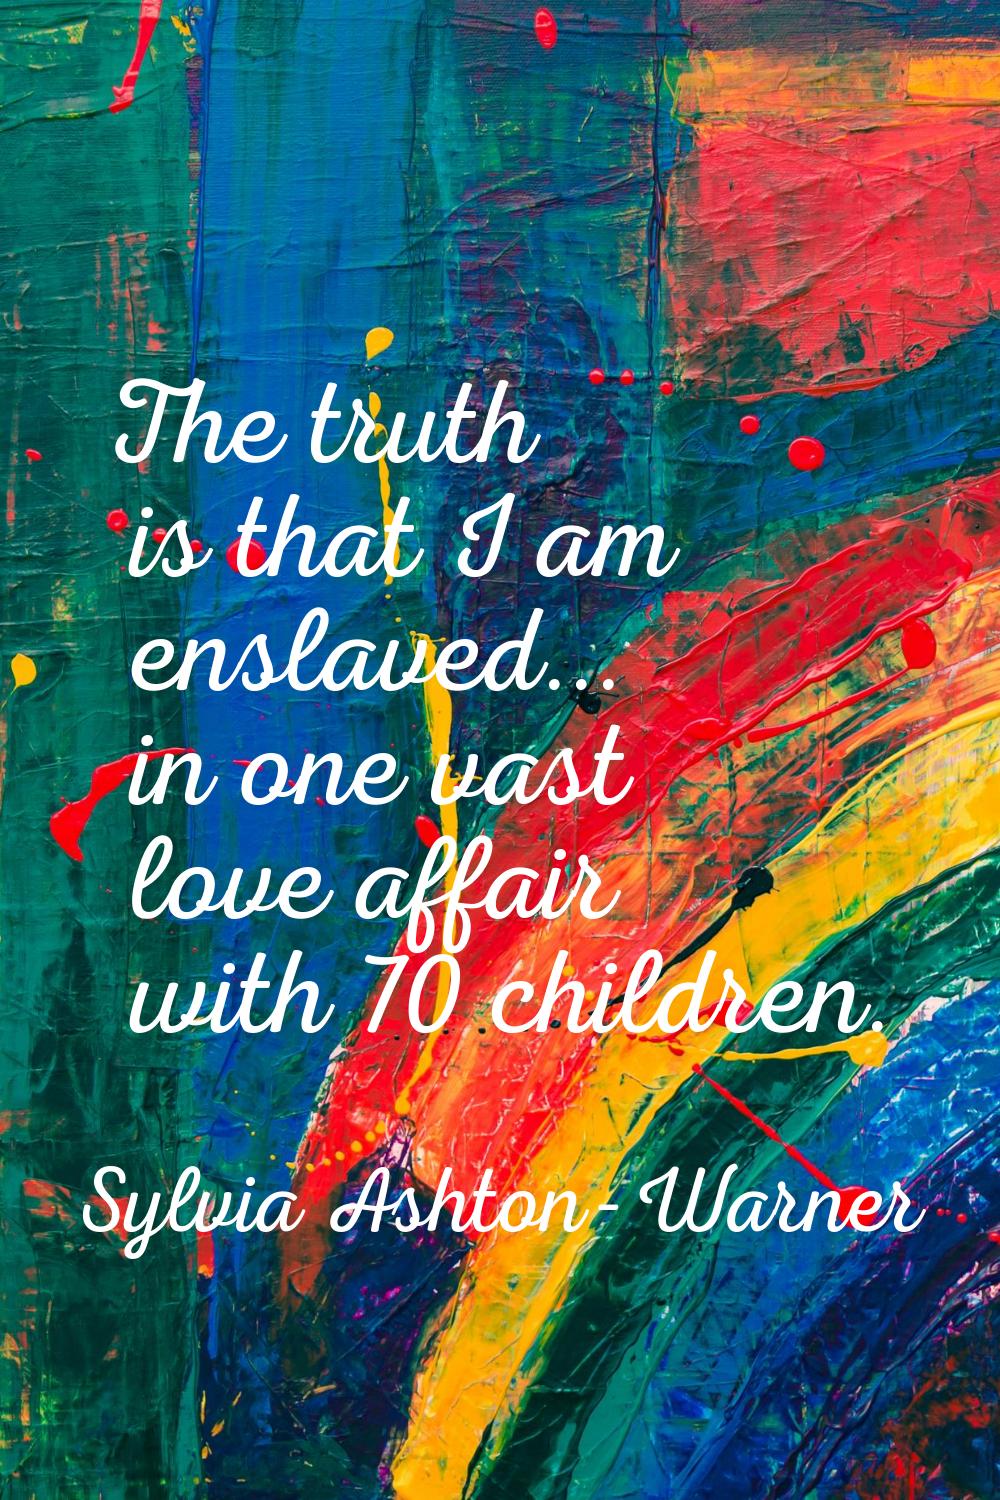 The truth is that I am enslaved... in one vast love affair with 70 children.